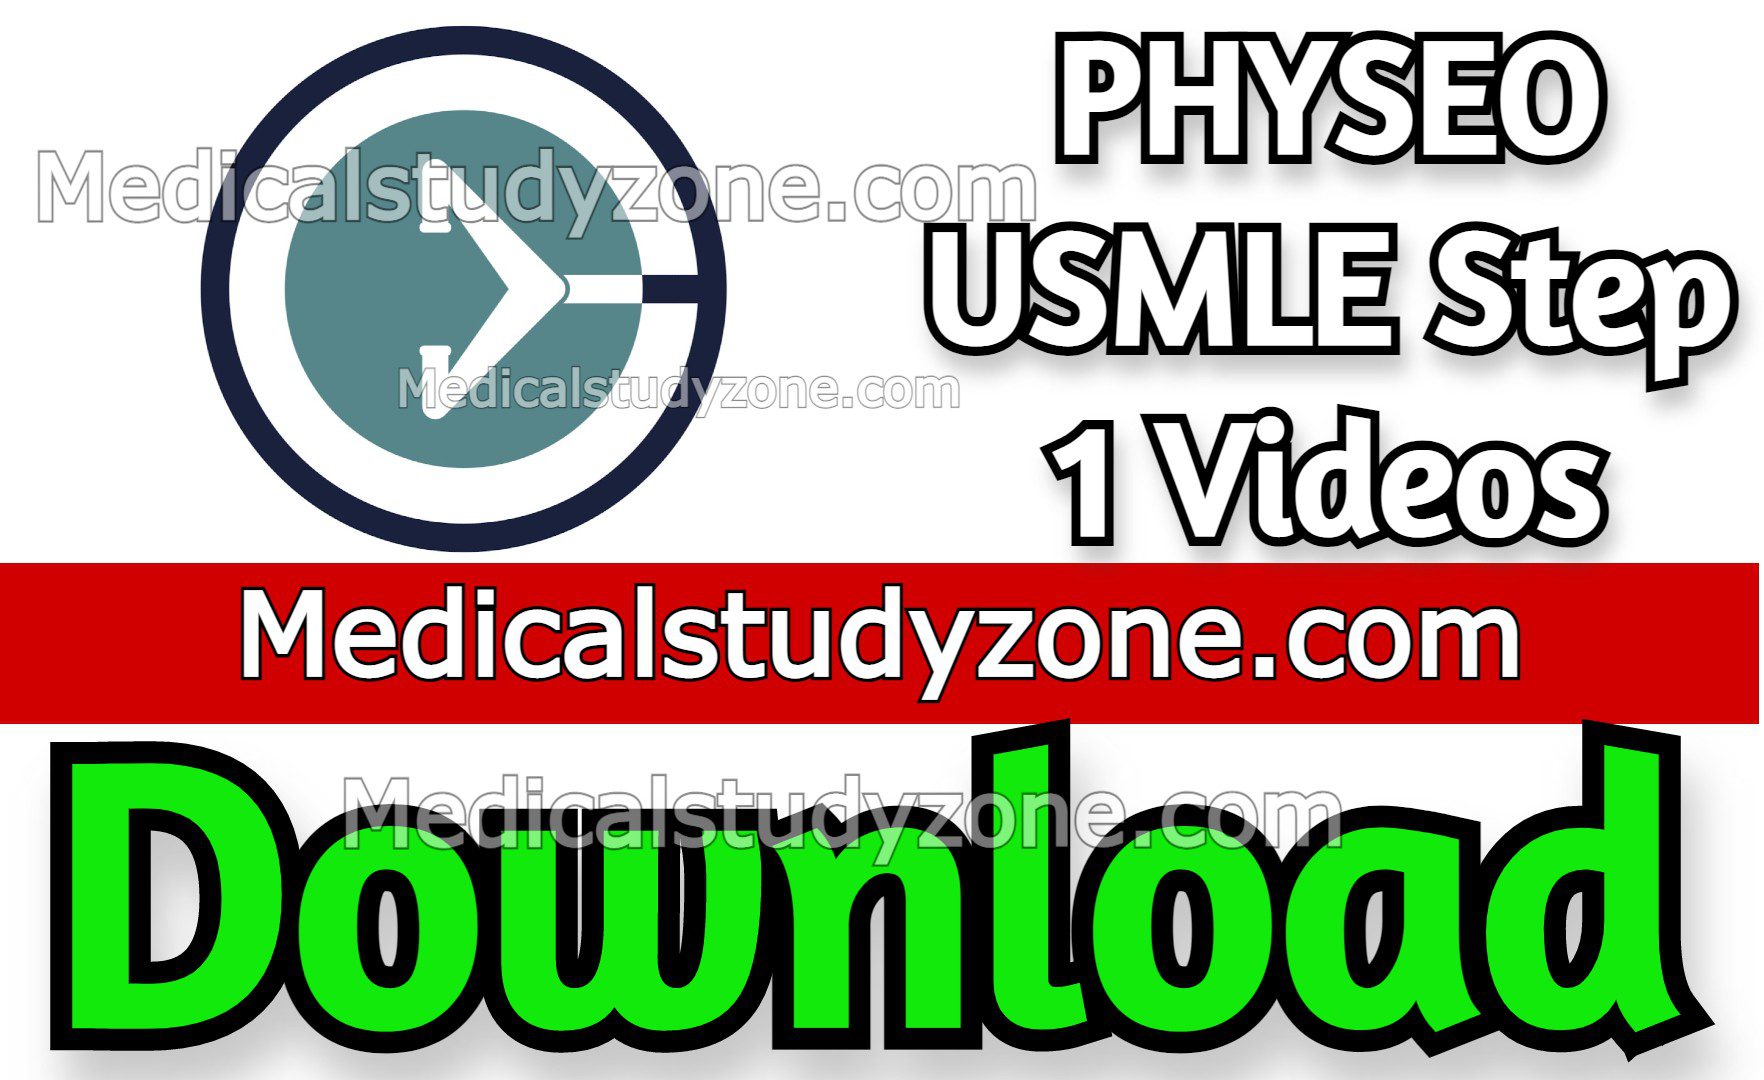 PHYSEO USMLE Step 1 2023 Videos Free Download